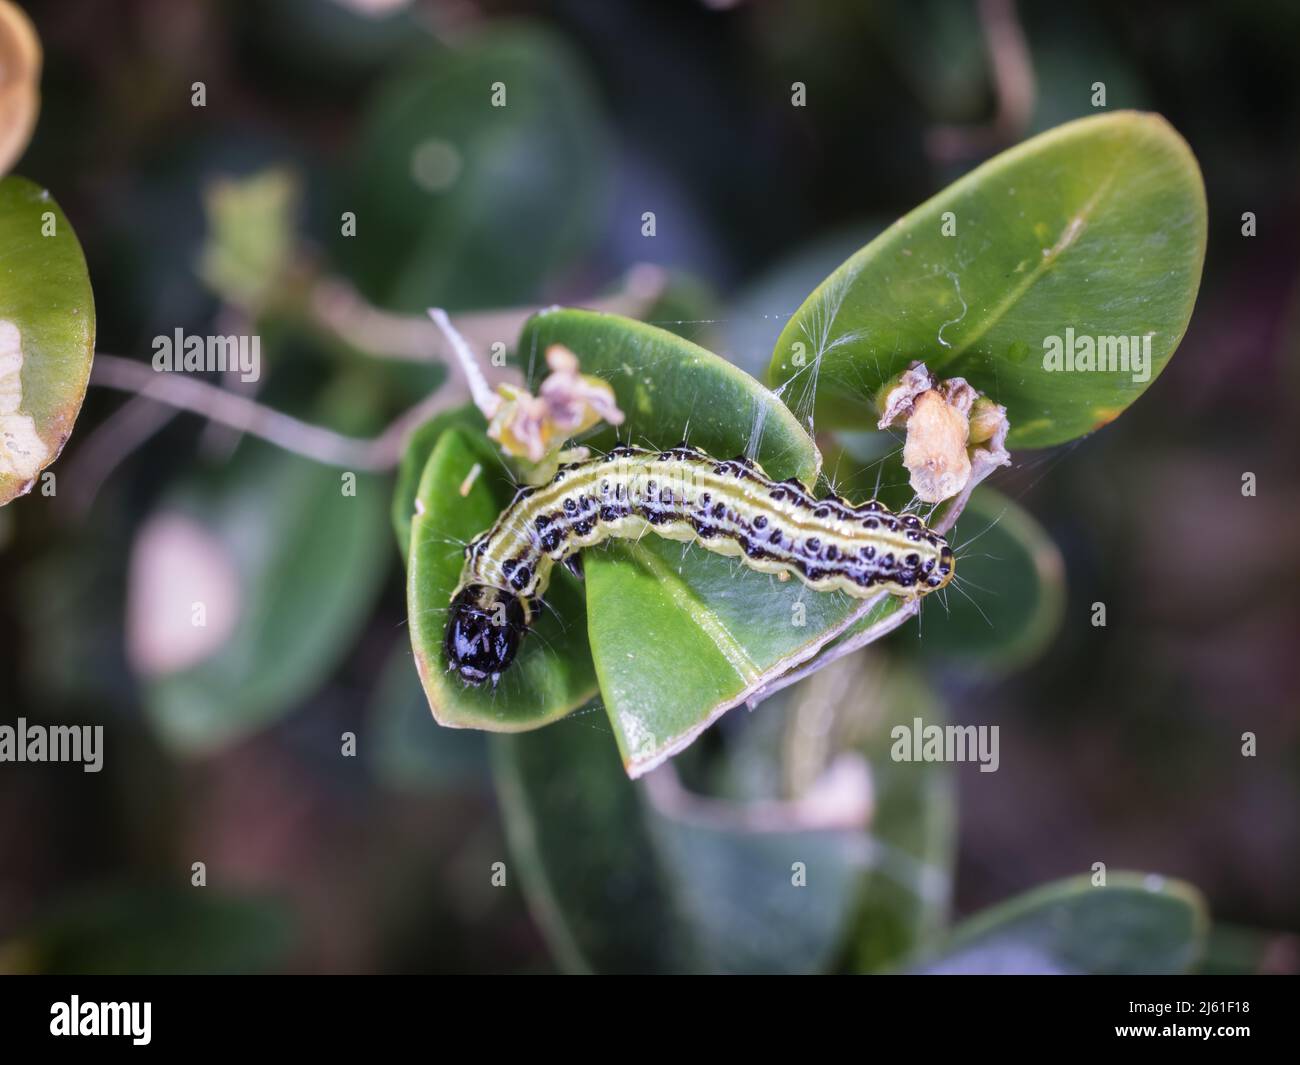 image shows a top view of box tree caterpillar feeding on box leaf Stock Photo